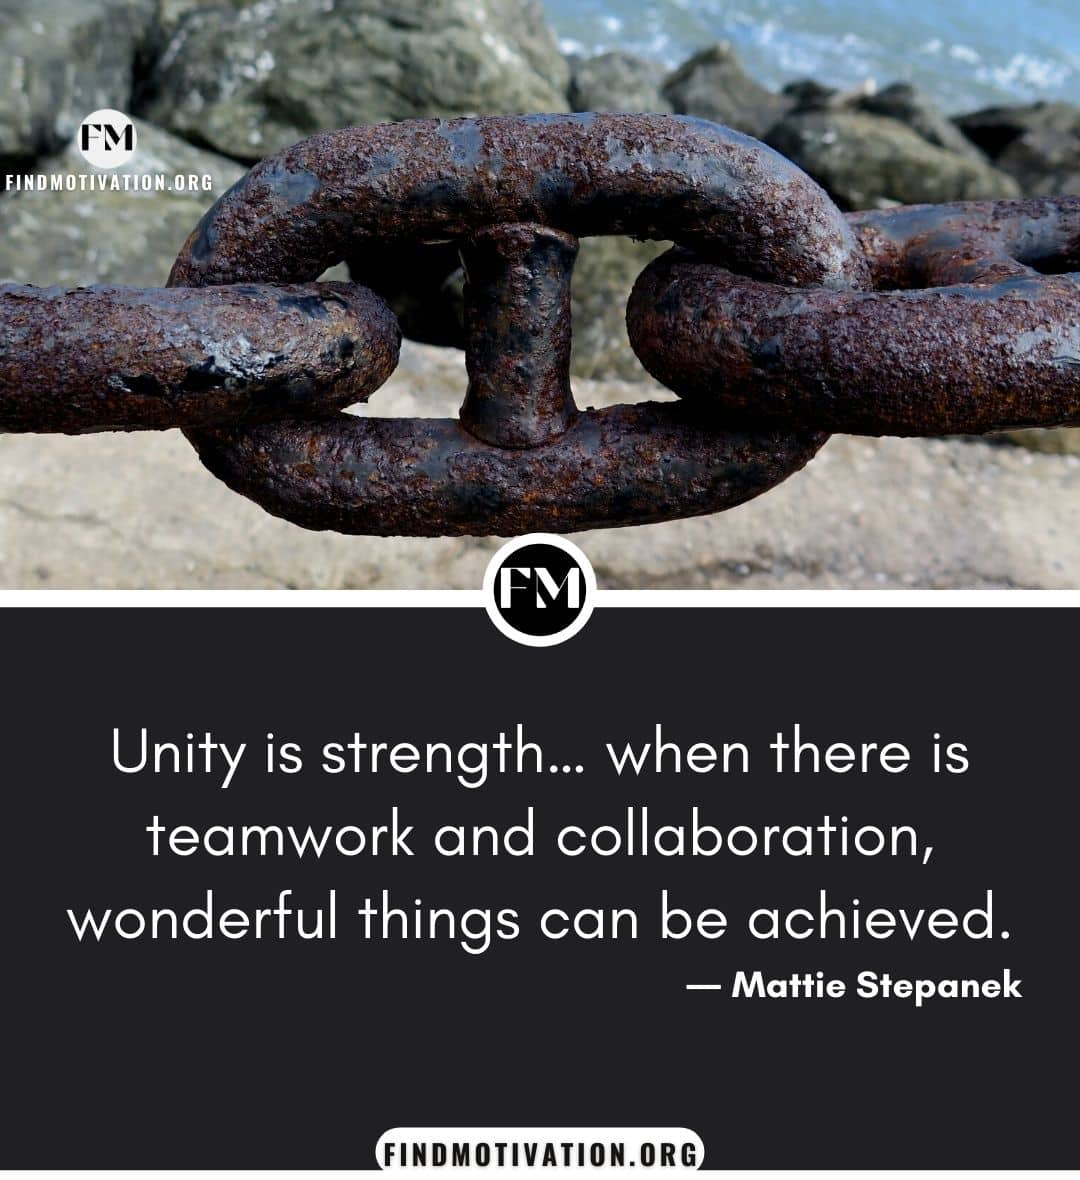 Strength positive quotes for the day with some learning ways to become more strong